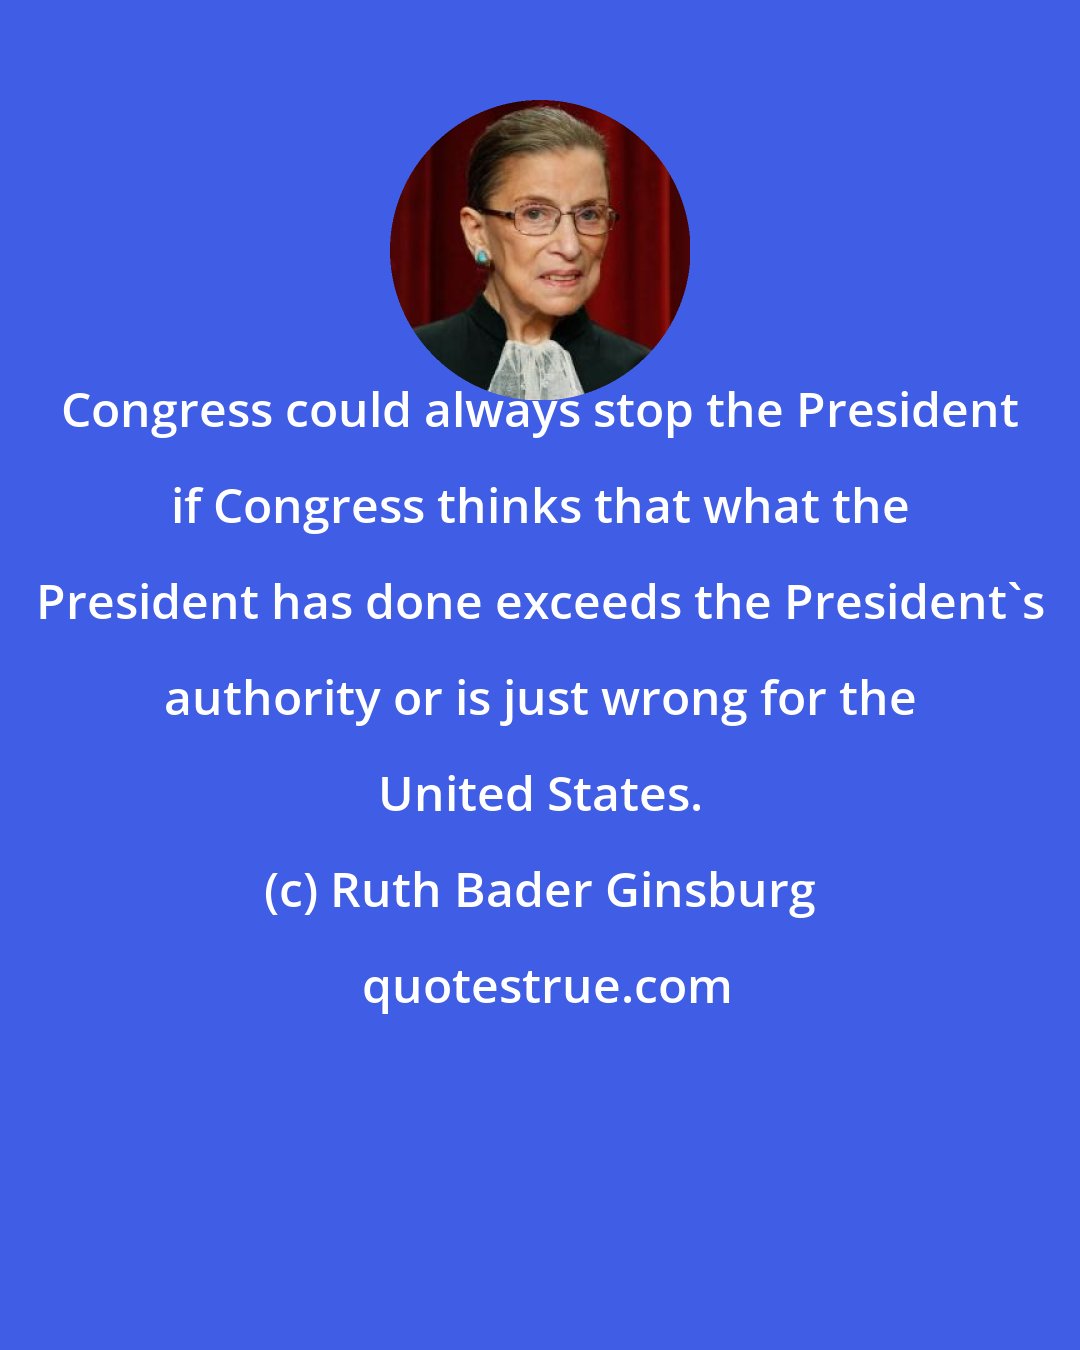 Ruth Bader Ginsburg: Congress could always stop the President if Congress thinks that what the President has done exceeds the President's authority or is just wrong for the United States.